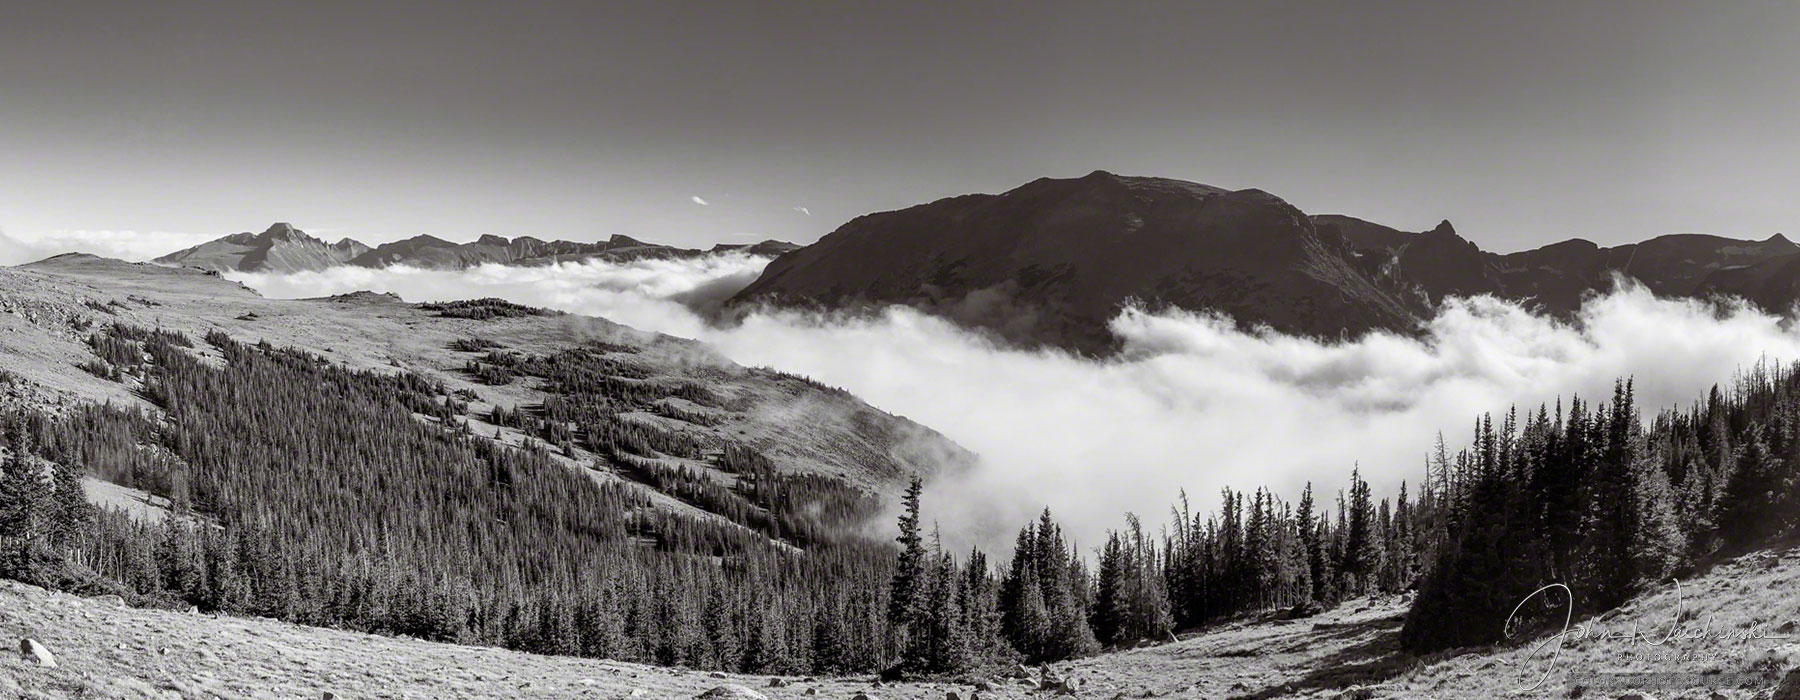 Photos of Forest Fog in Rocky Mountain National Park Colorado